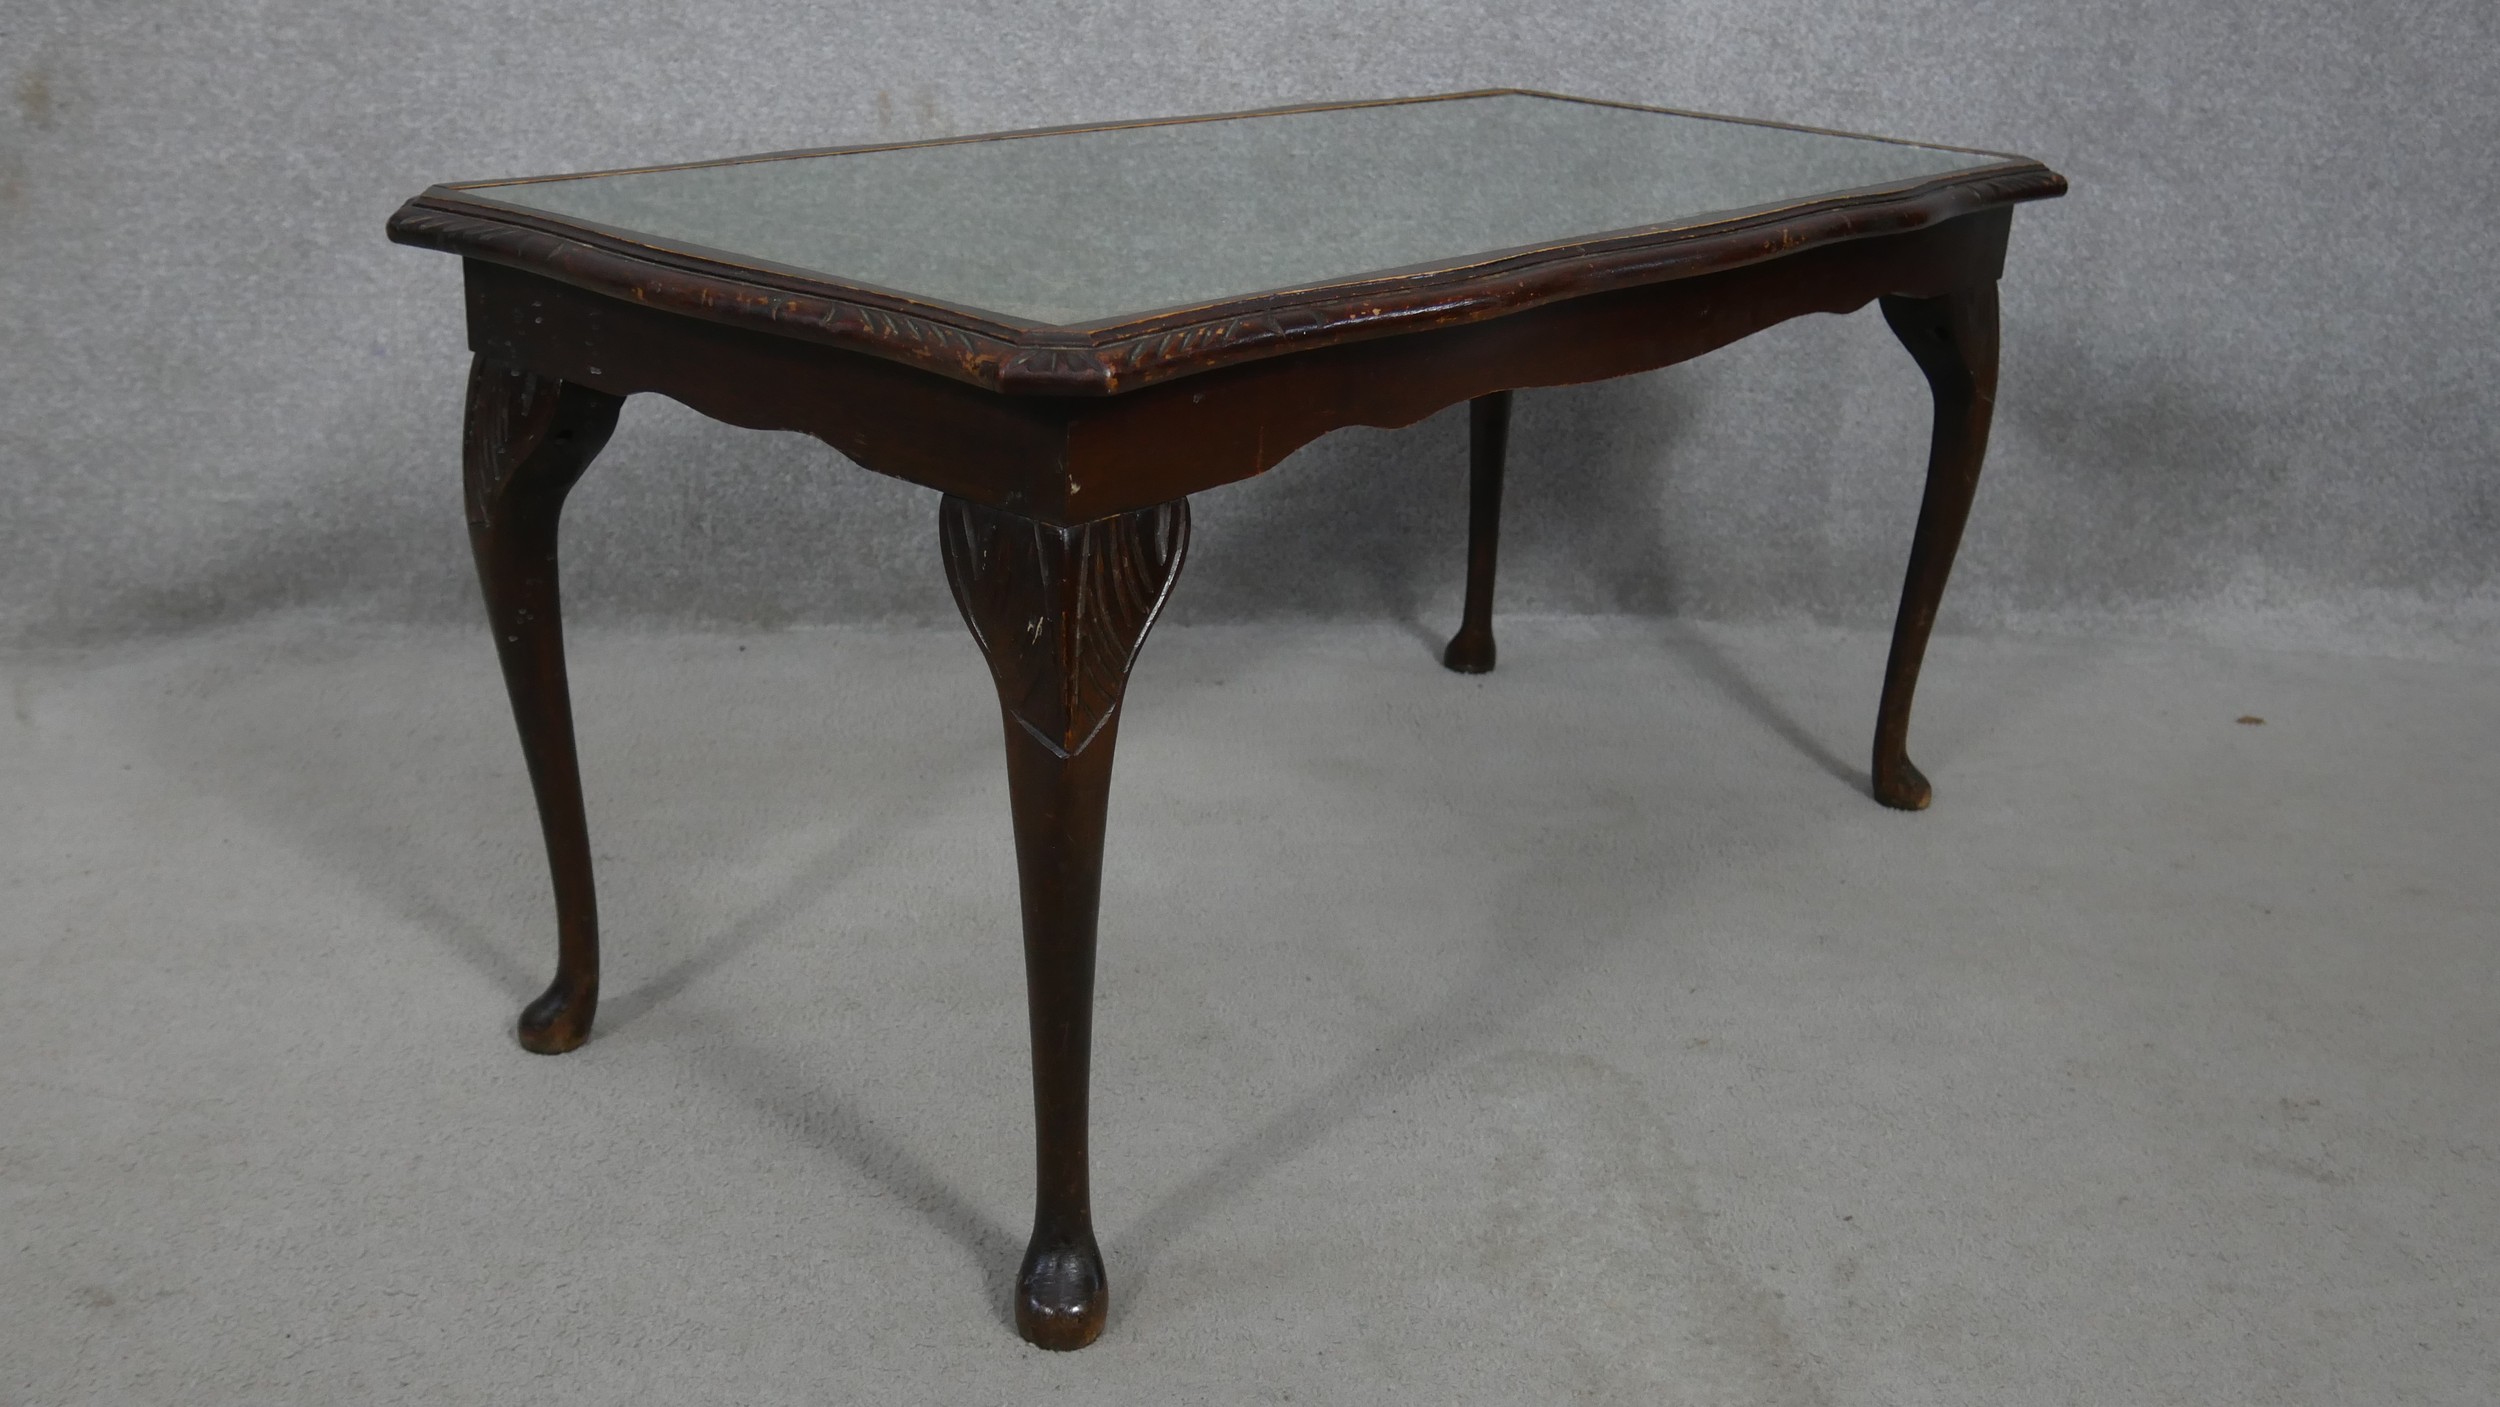 A Georgian style mahogany coffee table with inset plate glass top and tooled leather insert on - Image 2 of 5